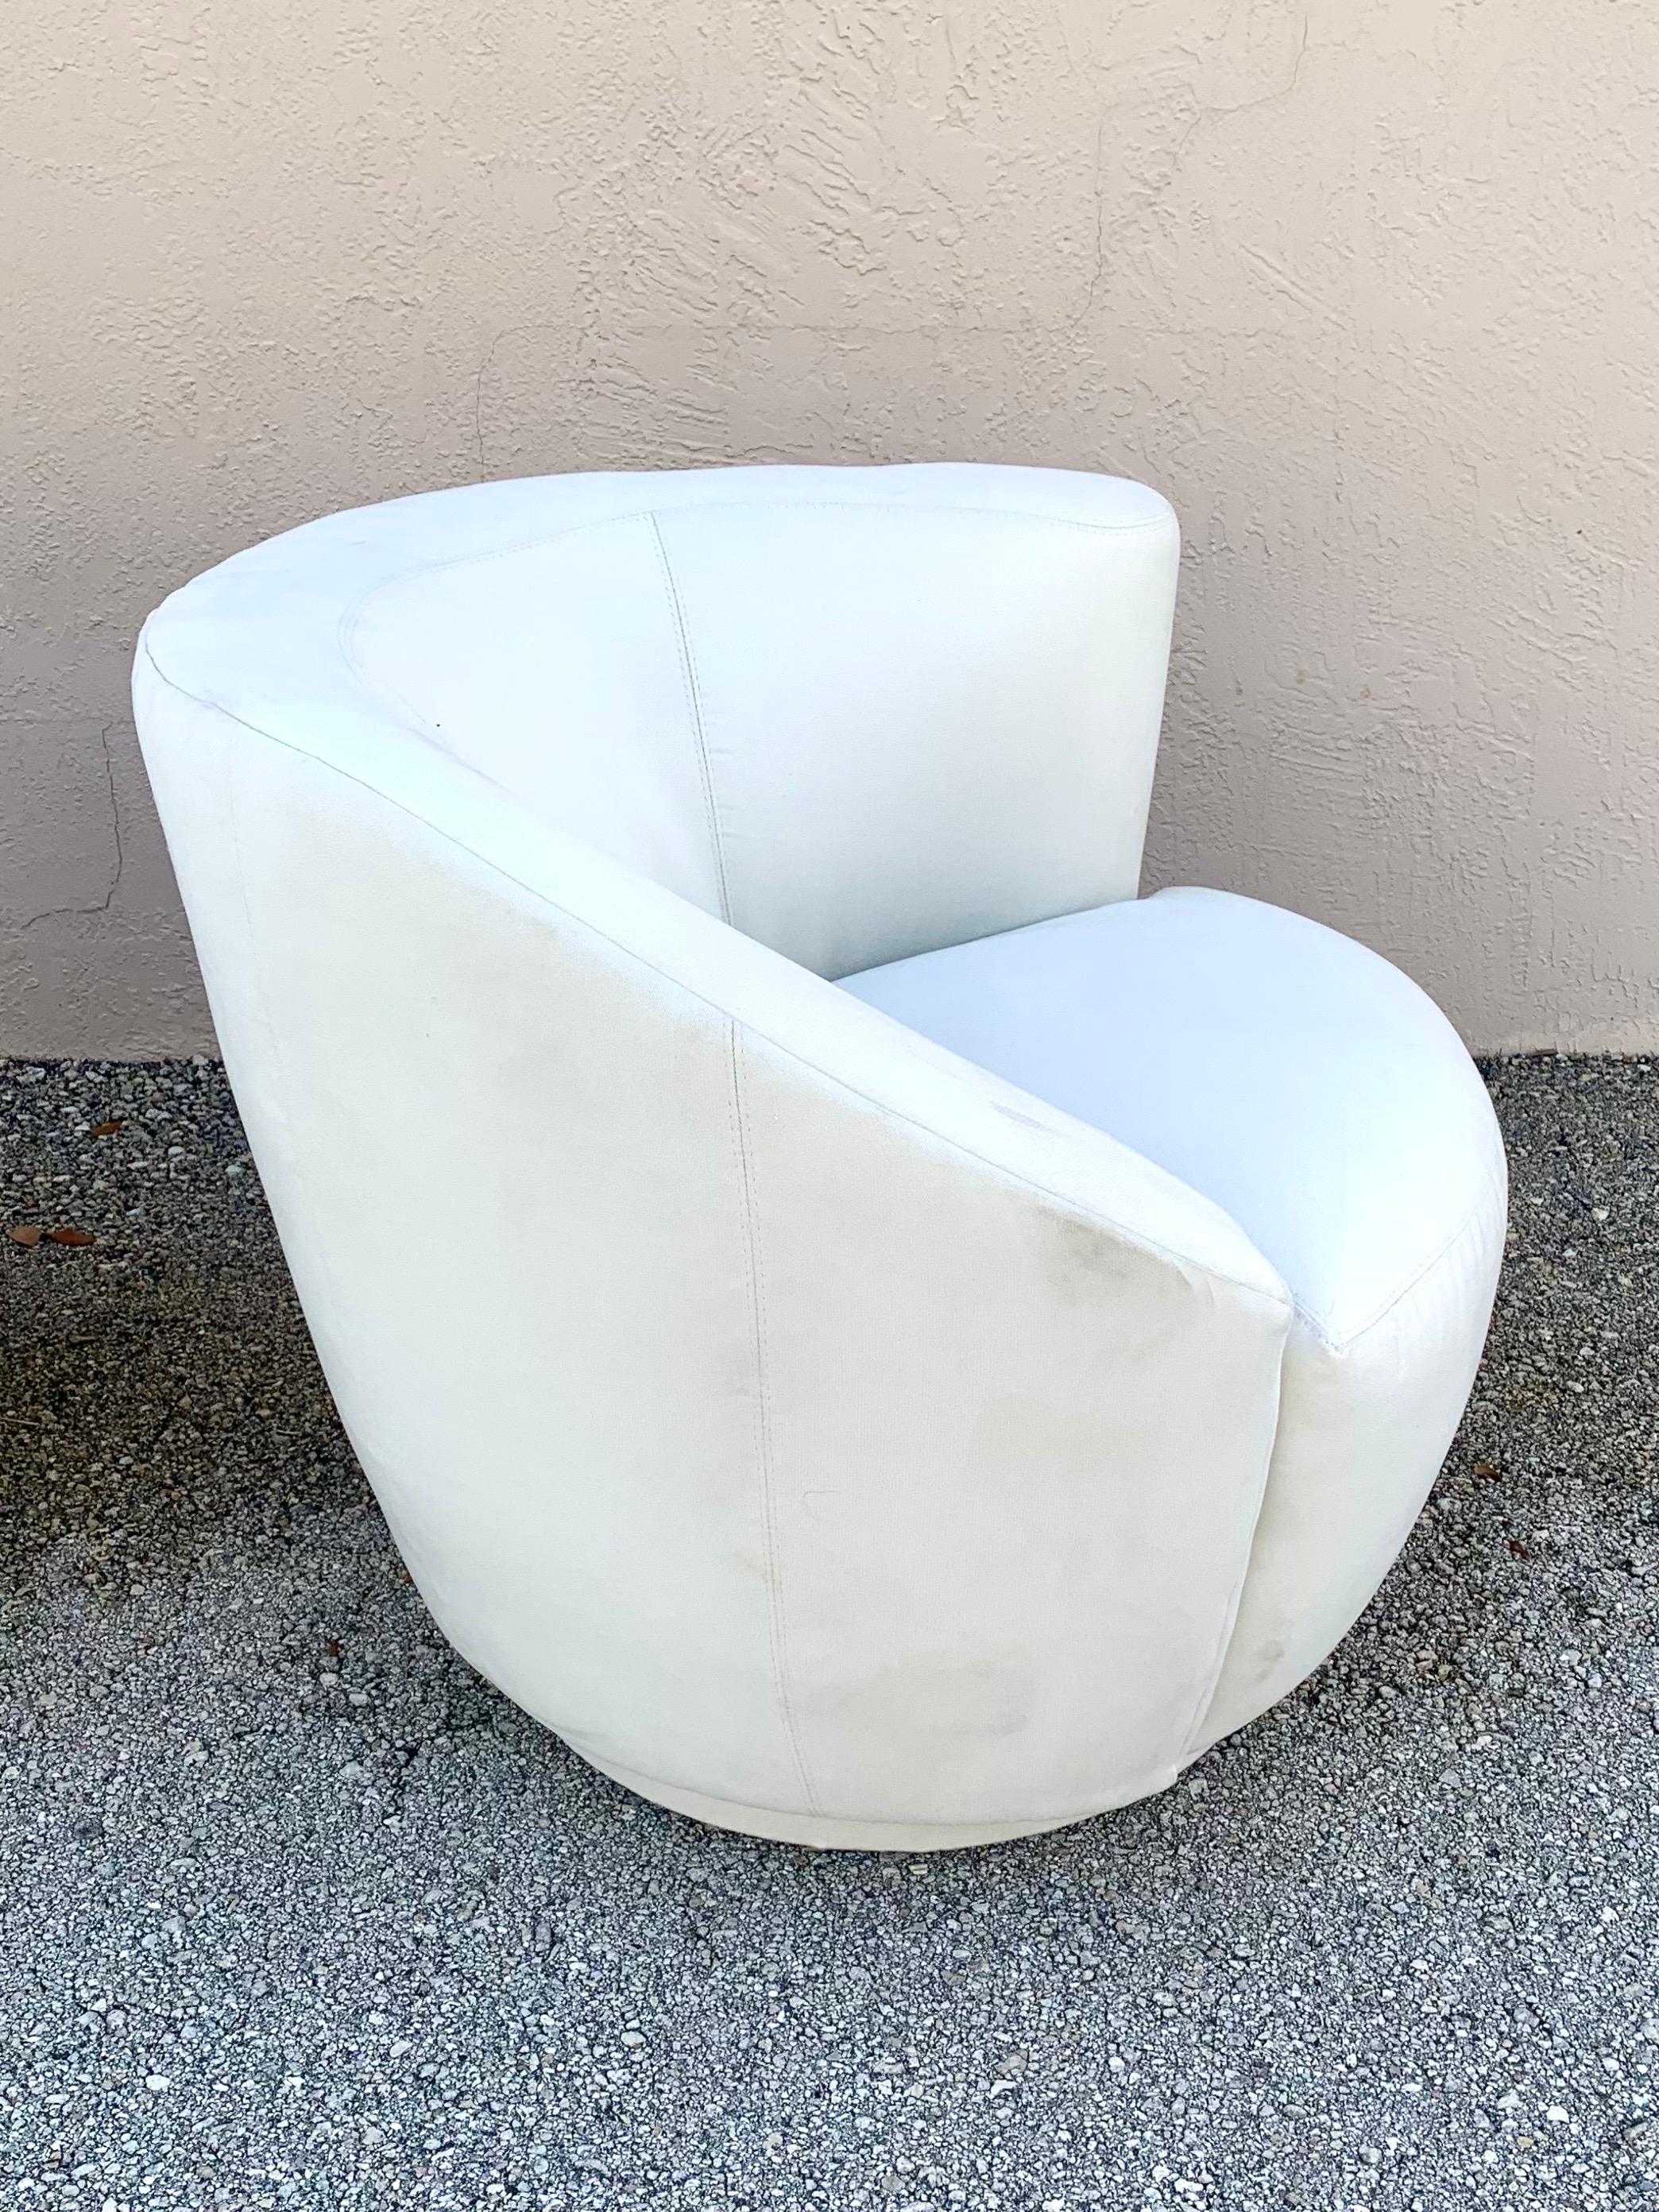 American Mid-Century Modern Nautilus Style Swivel Chairs in White, a Pair